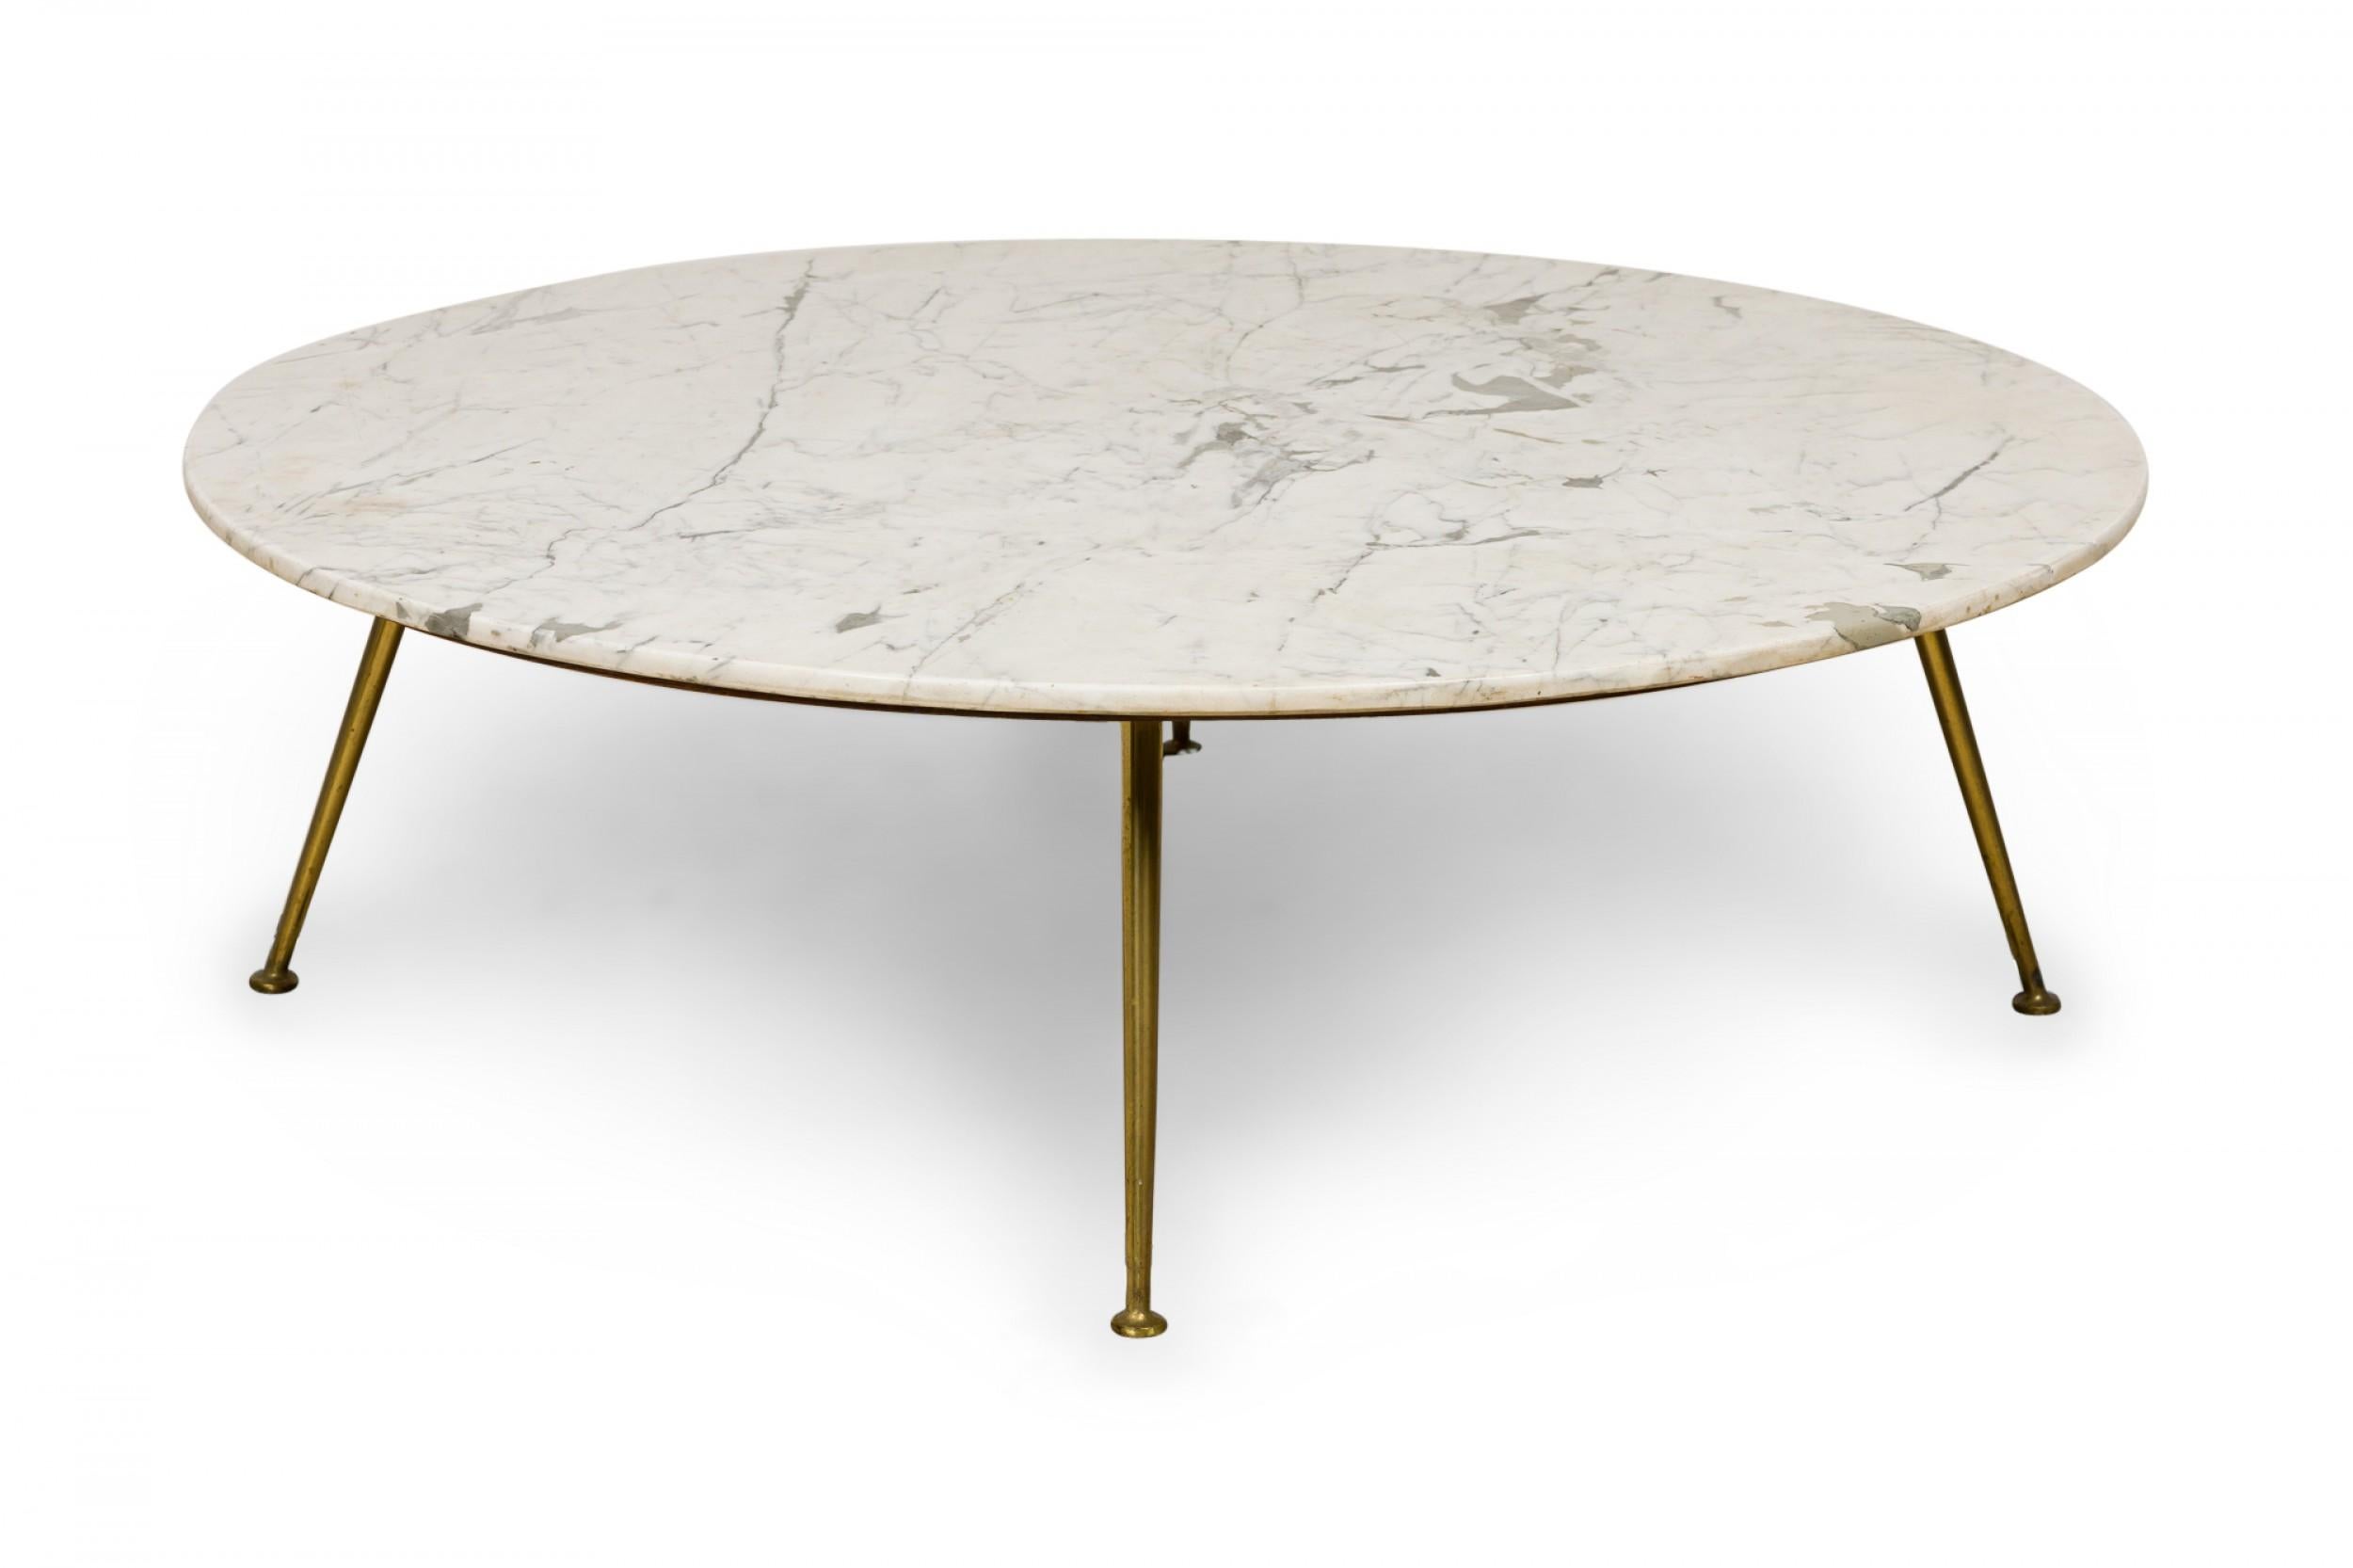 Italian mid-Century circular cocktail / coffee table with a Carrera marble top resting on a wooden platform supported by three tapered brass legs ending in circular feet.